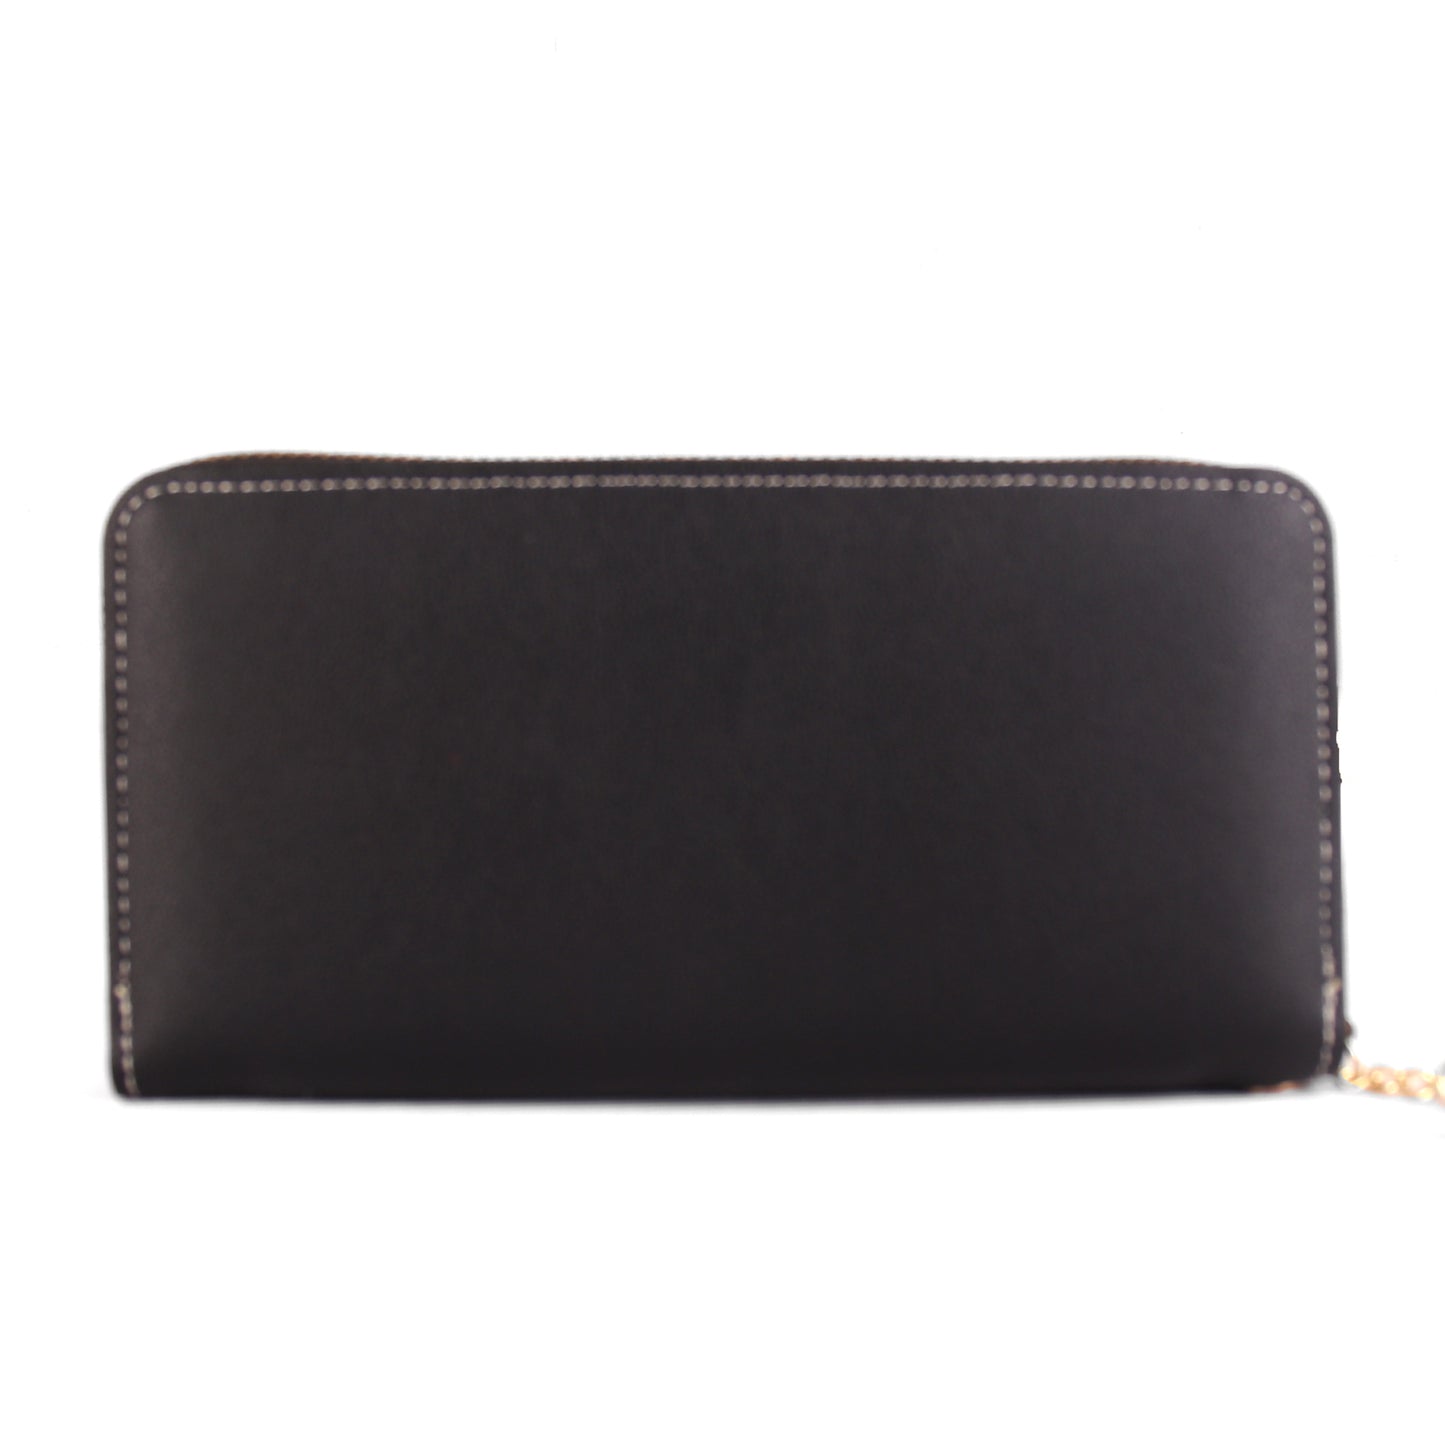 Wallet,The Envelope Wallet in Black & White - Cippele Multi Store